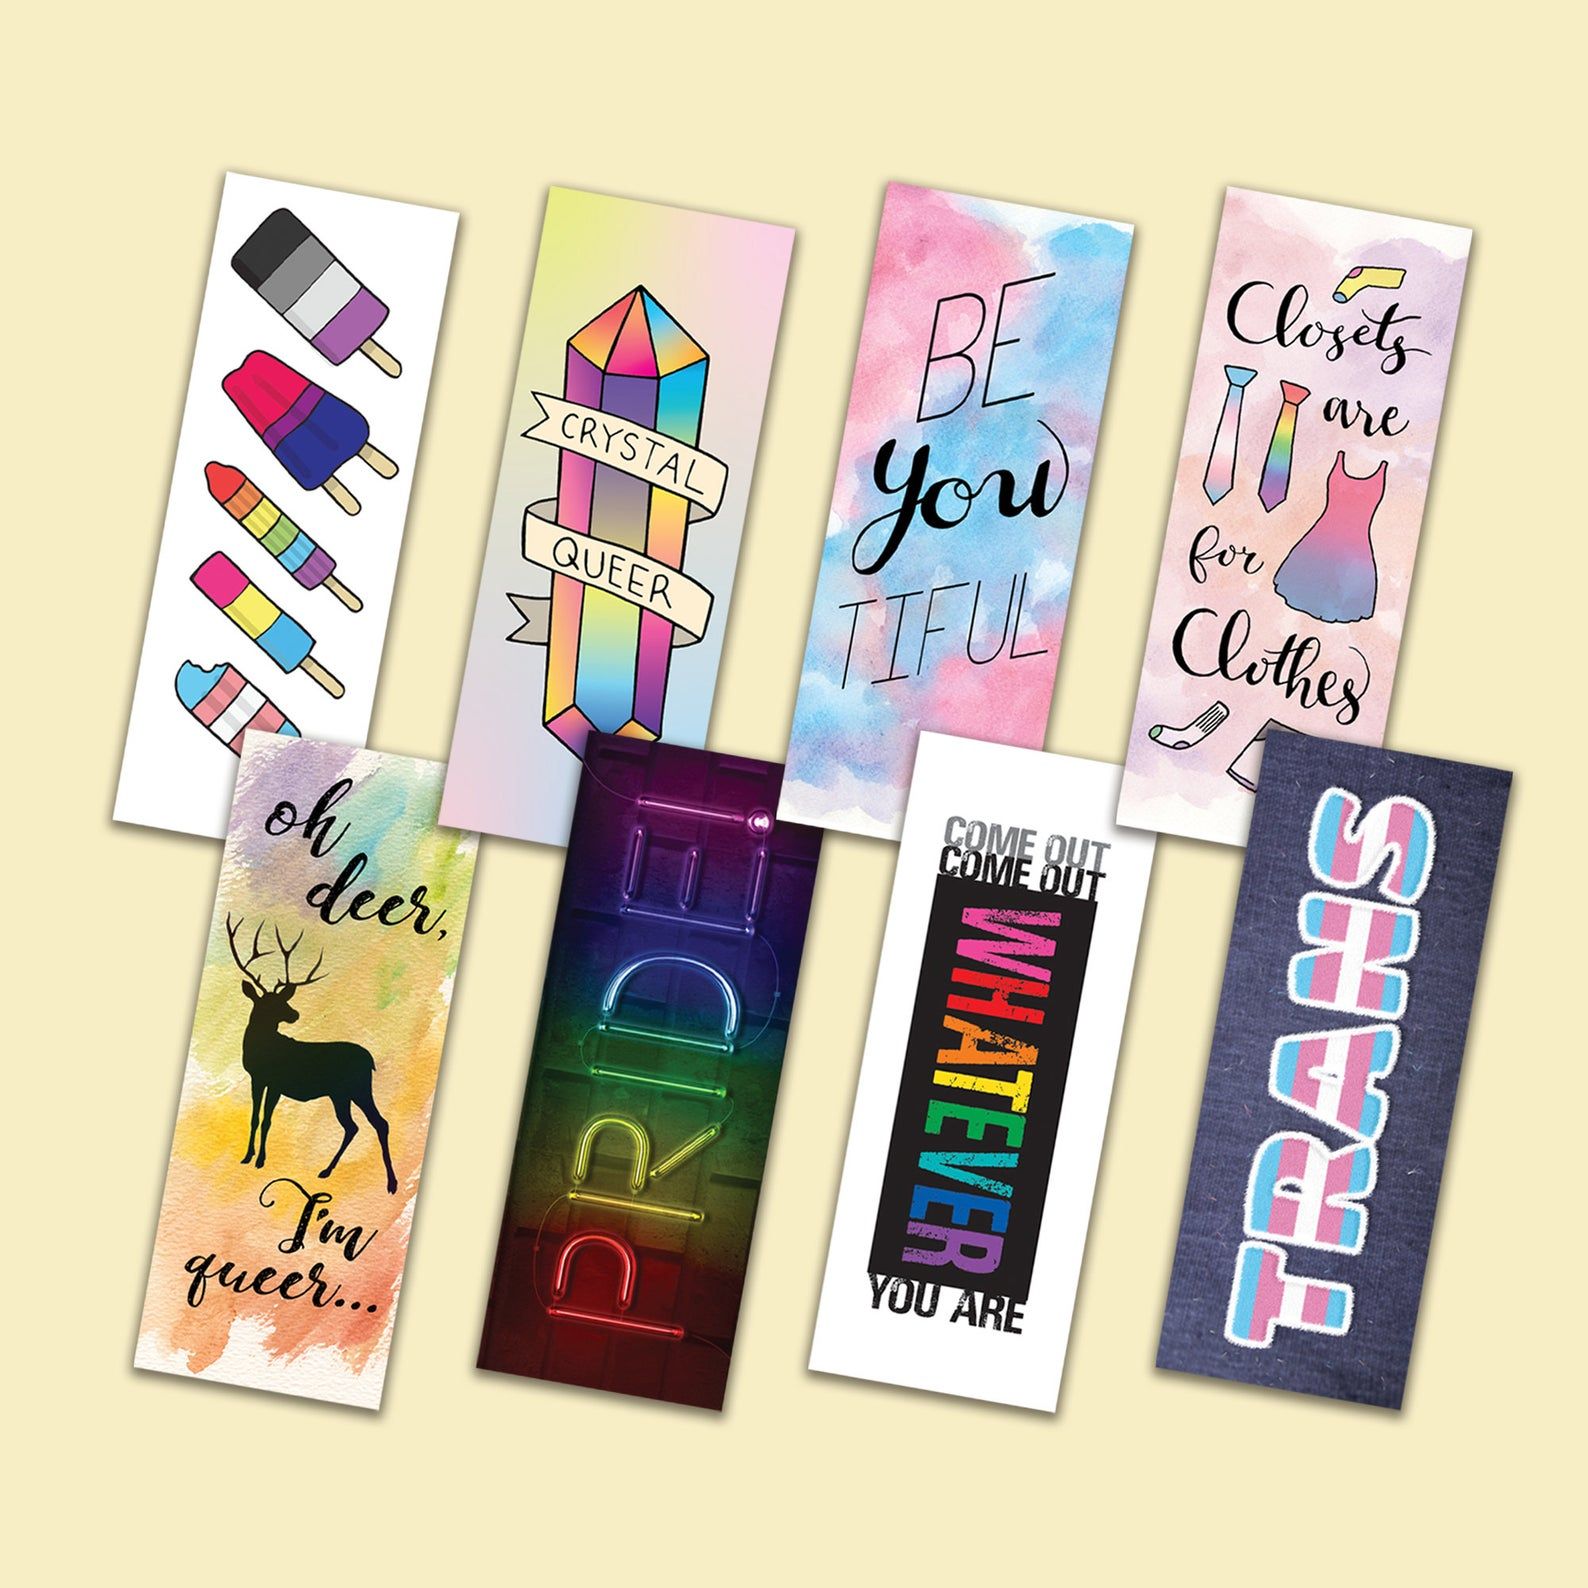 Rainbows of Love: Bookish Goods for LGBTQ+ Readers